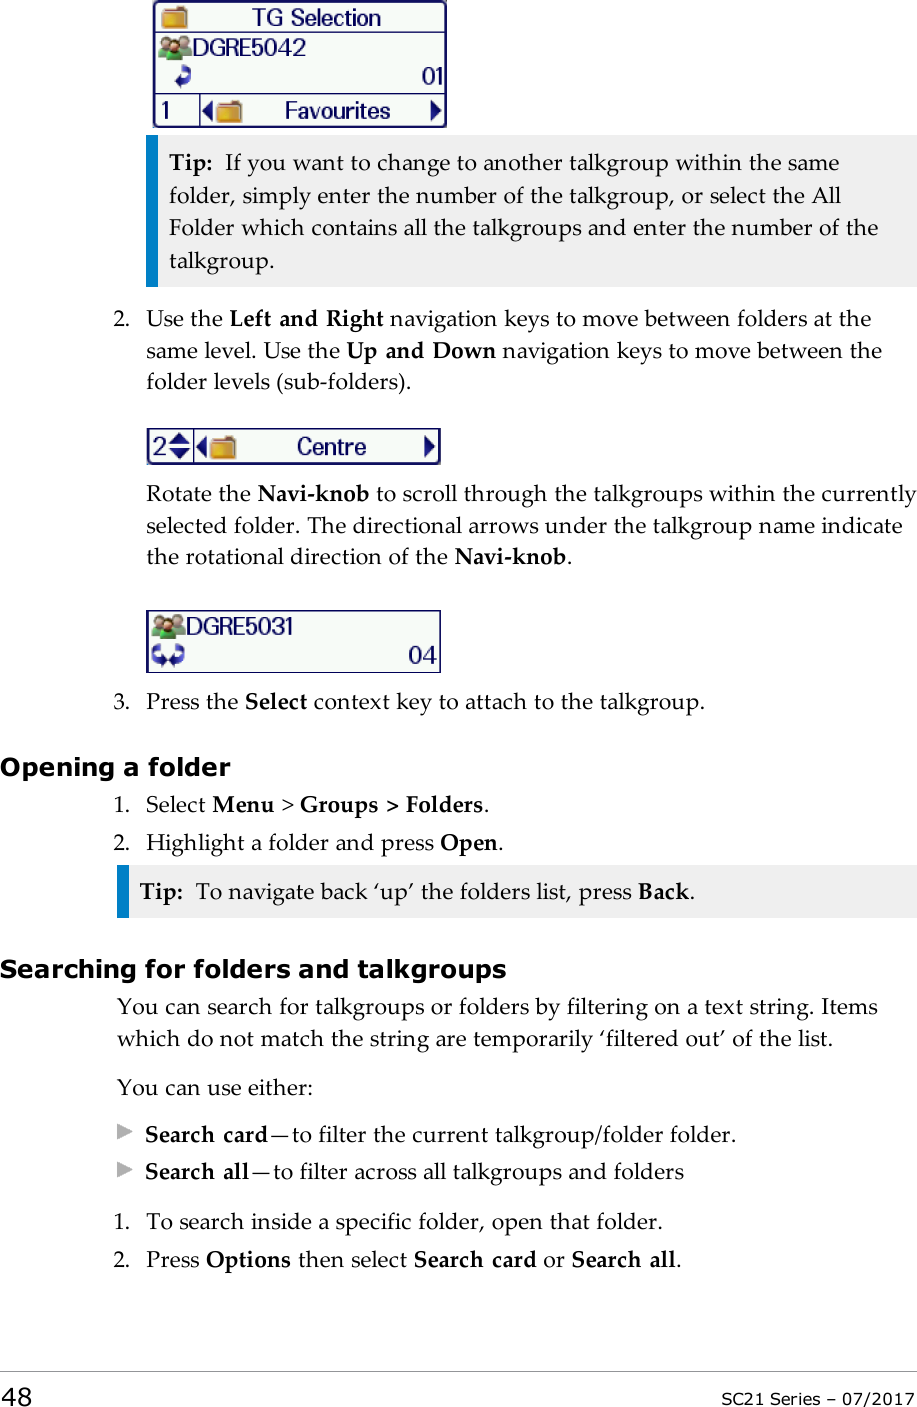 Tip: If you want to change to another talkgroup within the samefolder, simply enter the number of the talkgroup, or select the AllFolder which contains all the talkgroups and enter the number of thetalkgroup.2. Use the Left and Right navigation keys to move between folders at thesame level. Use the Up and Down navigation keys to move between thefolder levels (sub-folders).Rotate the Navi-knob to scroll through the talkgroups within the currentlyselected folder. The directional arrows under the talkgroup name indicatethe rotational direction of the Navi-knob.3. Press the Select context key to attach to the talkgroup.Opening a folder1. Select Menu &gt;Groups &gt; Folders.2. Highlight a folder and press Open.Tip: To navigate back ‘up’ the folders list, press Back.Searching for folders and talkgroupsYou can search for talkgroups or folders by filtering on a text string. Itemswhich do not match the string are temporarily ‘filtered out’ of the list.You can use either:Search card—to filter the current talkgroup/folder folder.Search all—to filter across all talkgroups and folders1. To search inside a specific folder, open that folder.2. Press Options then select Search card or Search all.48 SC21 Series – 07/2017